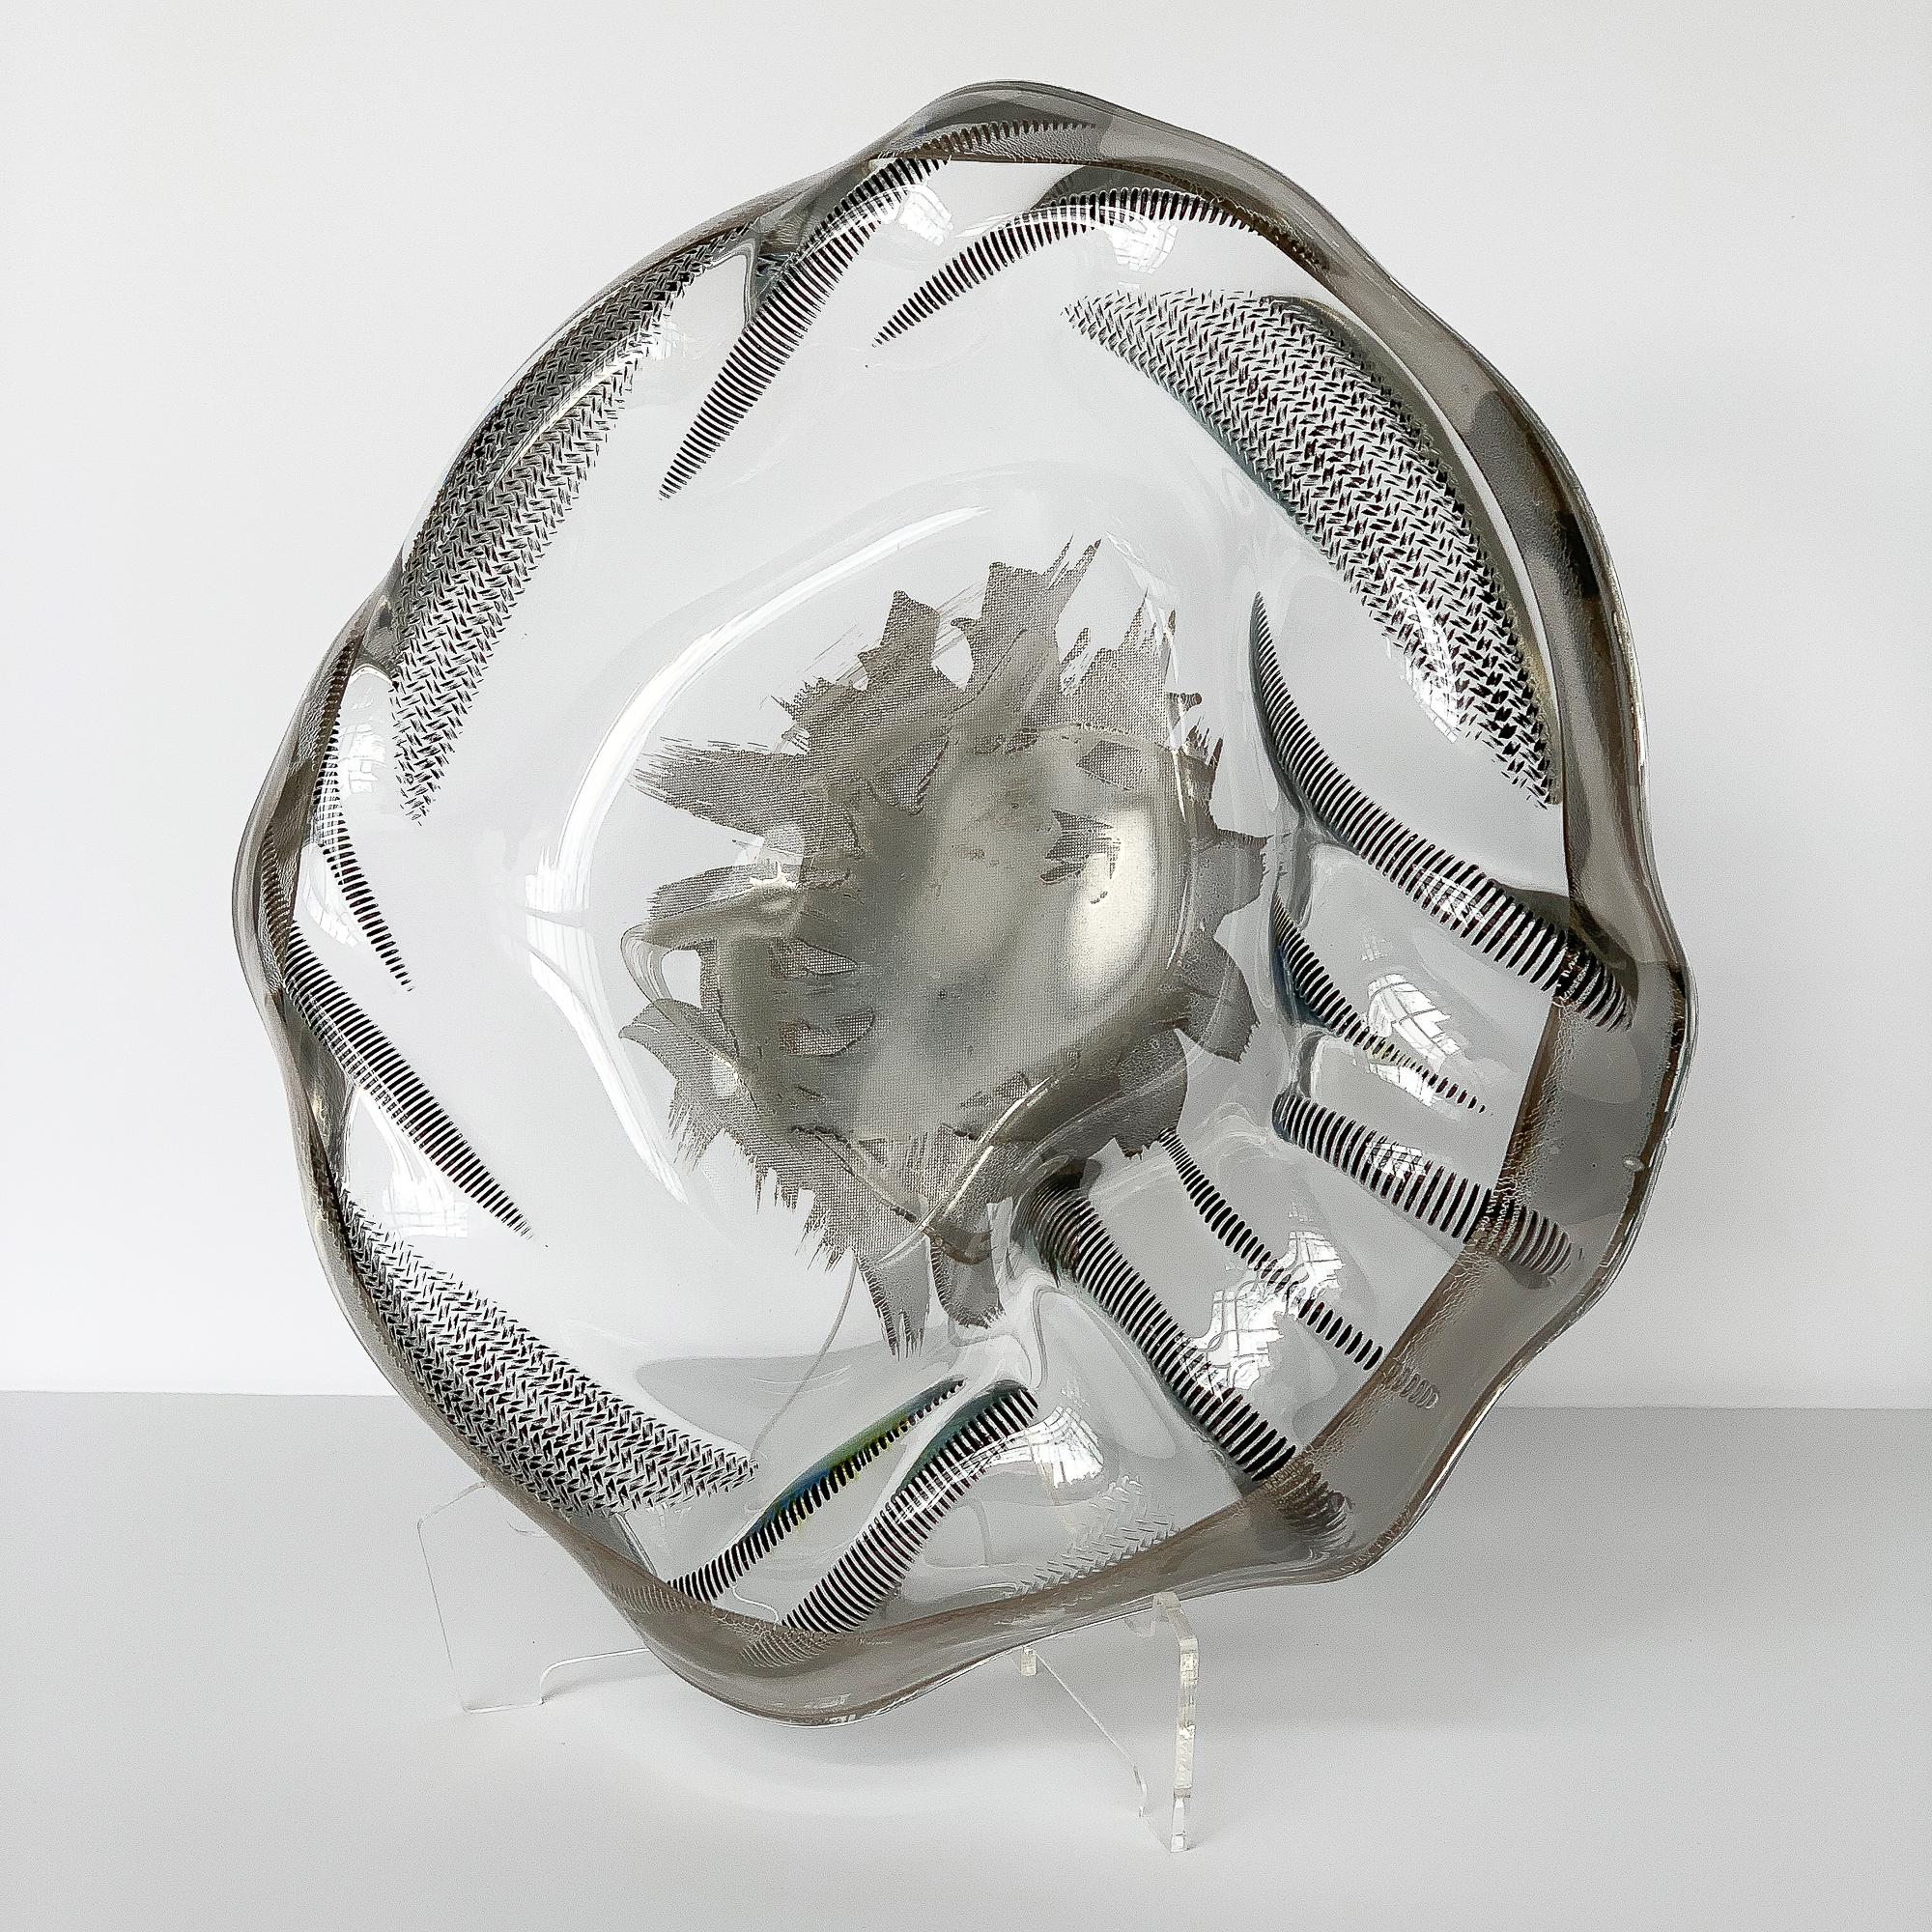 Unique sculptural art glass low bowl with silver details. Textural blackened relief of cord and rope design surrounds a flat depression with layered silver brush strokes. Silver banding along entire perimeter of the bowl. Consider displaying on an